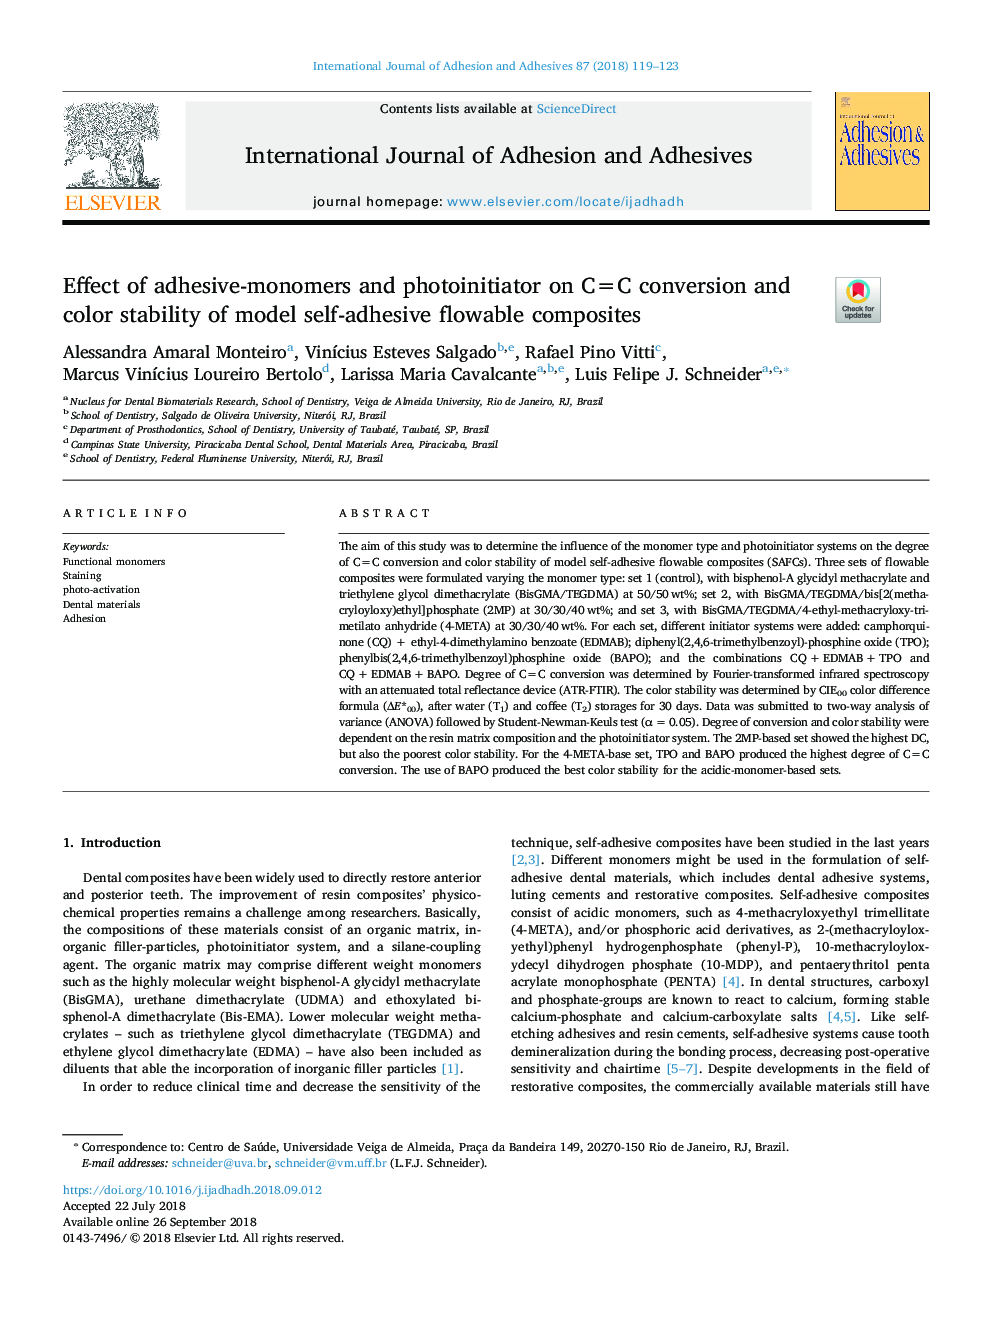 Effect of adhesive-monomers and photoinitiator on C=C conversion and color stability of model self-adhesive flowable composites